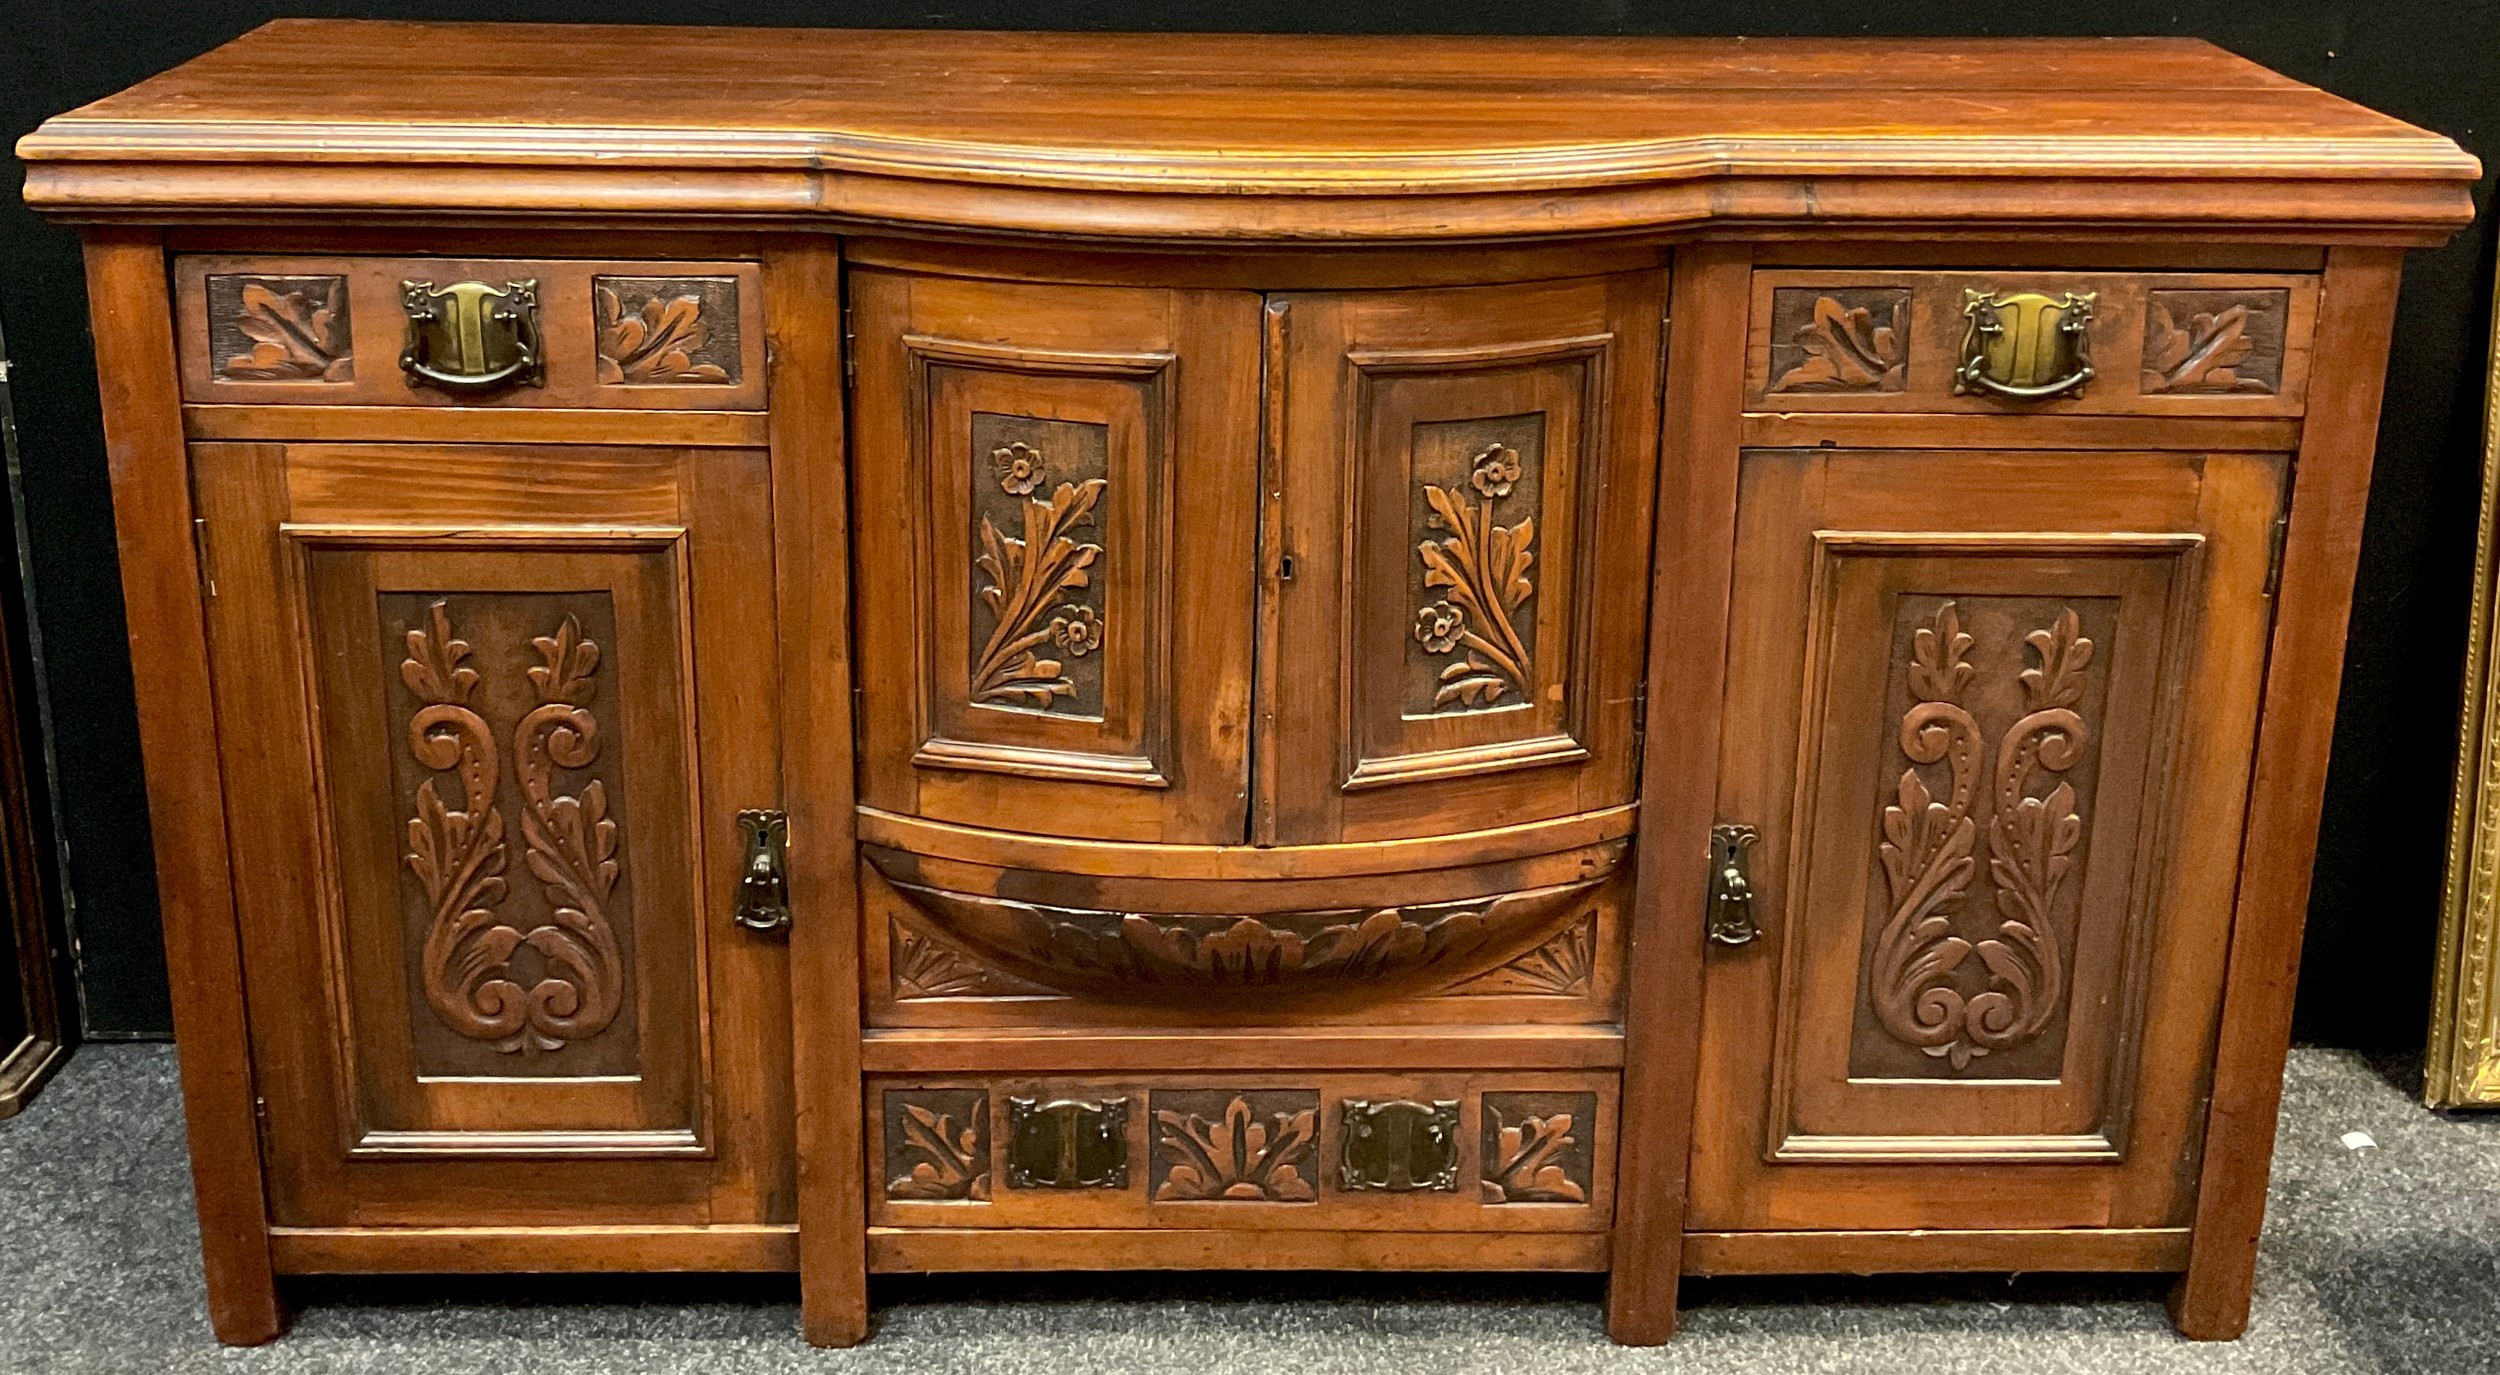 An early 20th century walnut breakfront sideboard, having an arrangement of small drawers and